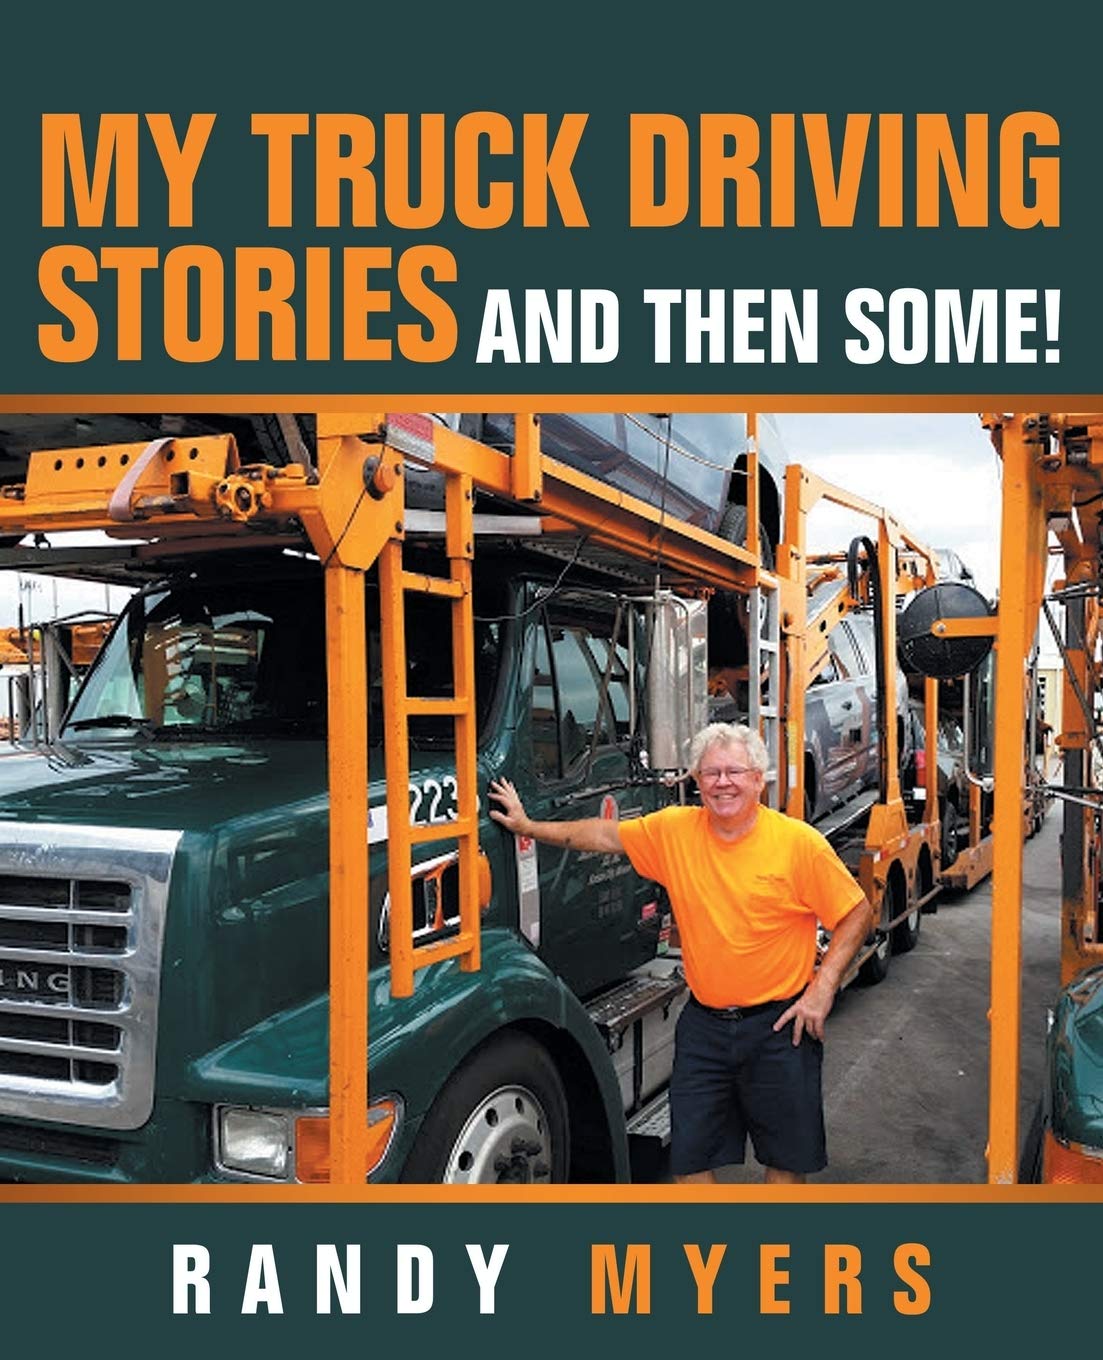 Author’s Tranquility Press Helps Randy Myers Tell My Truck Driving Stories: And Then Some! 